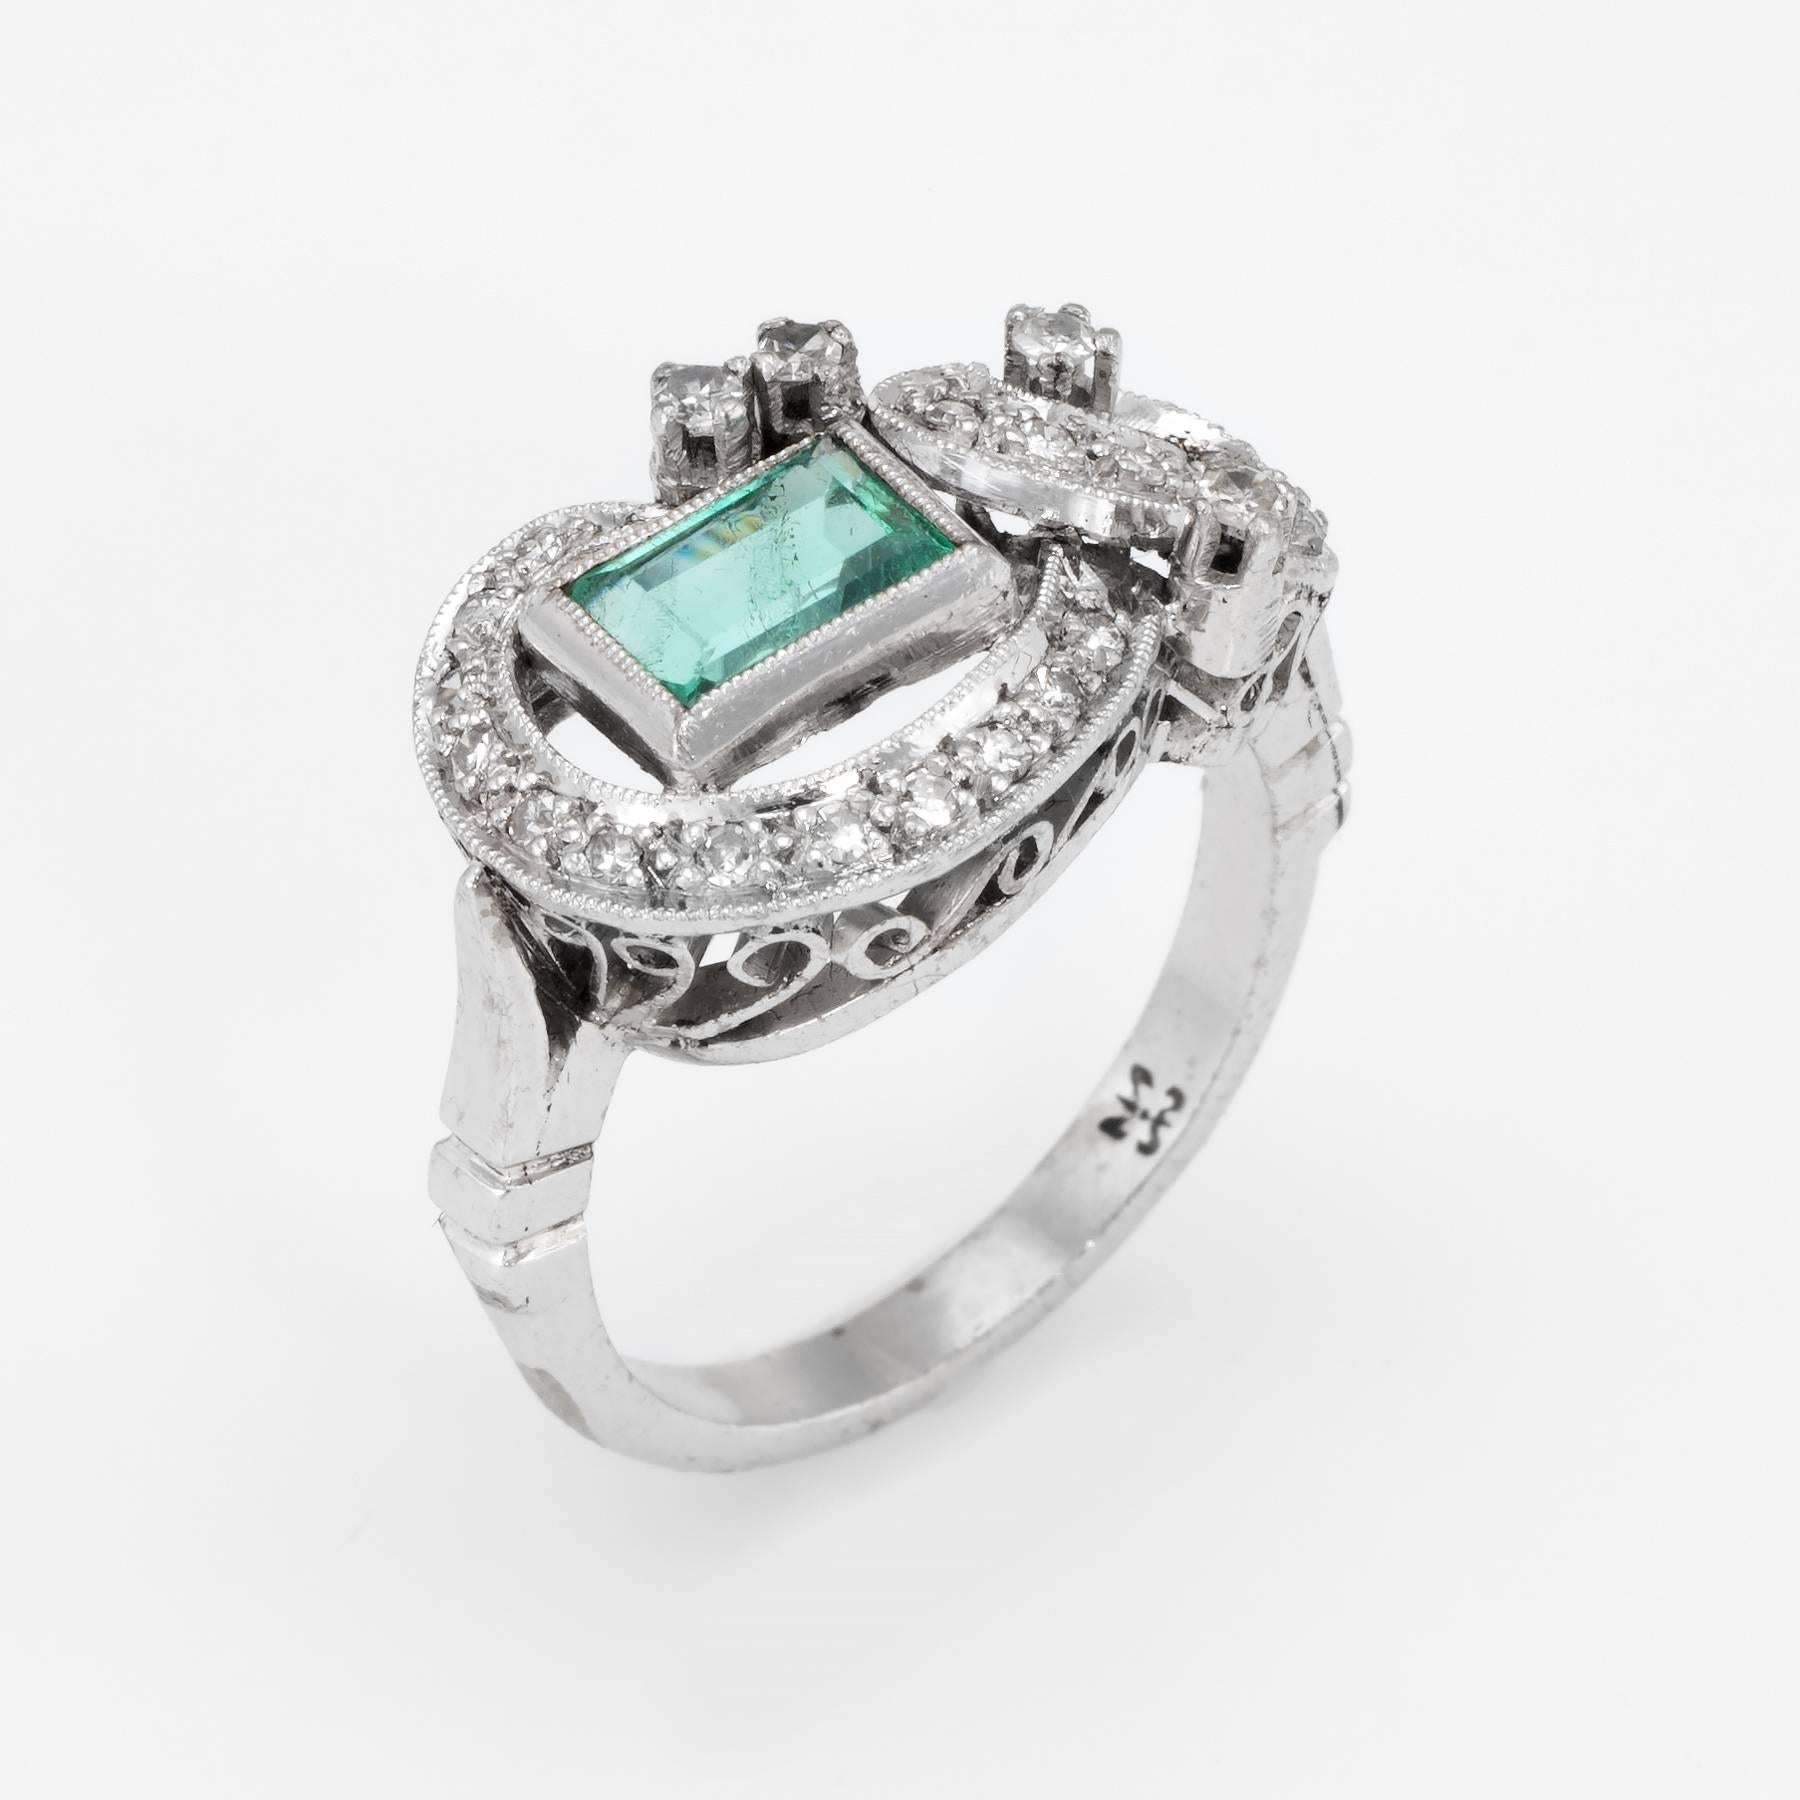 Elegant vintage cocktail ring (circa 1940s), crafted in palladium. 

Centrally mounted emerald cut emerald measures 6mm x 4mm (estimated at 0.50 carats), accented with an estimated 0.29 carats of single cut diamonds (estimated at I-J color and